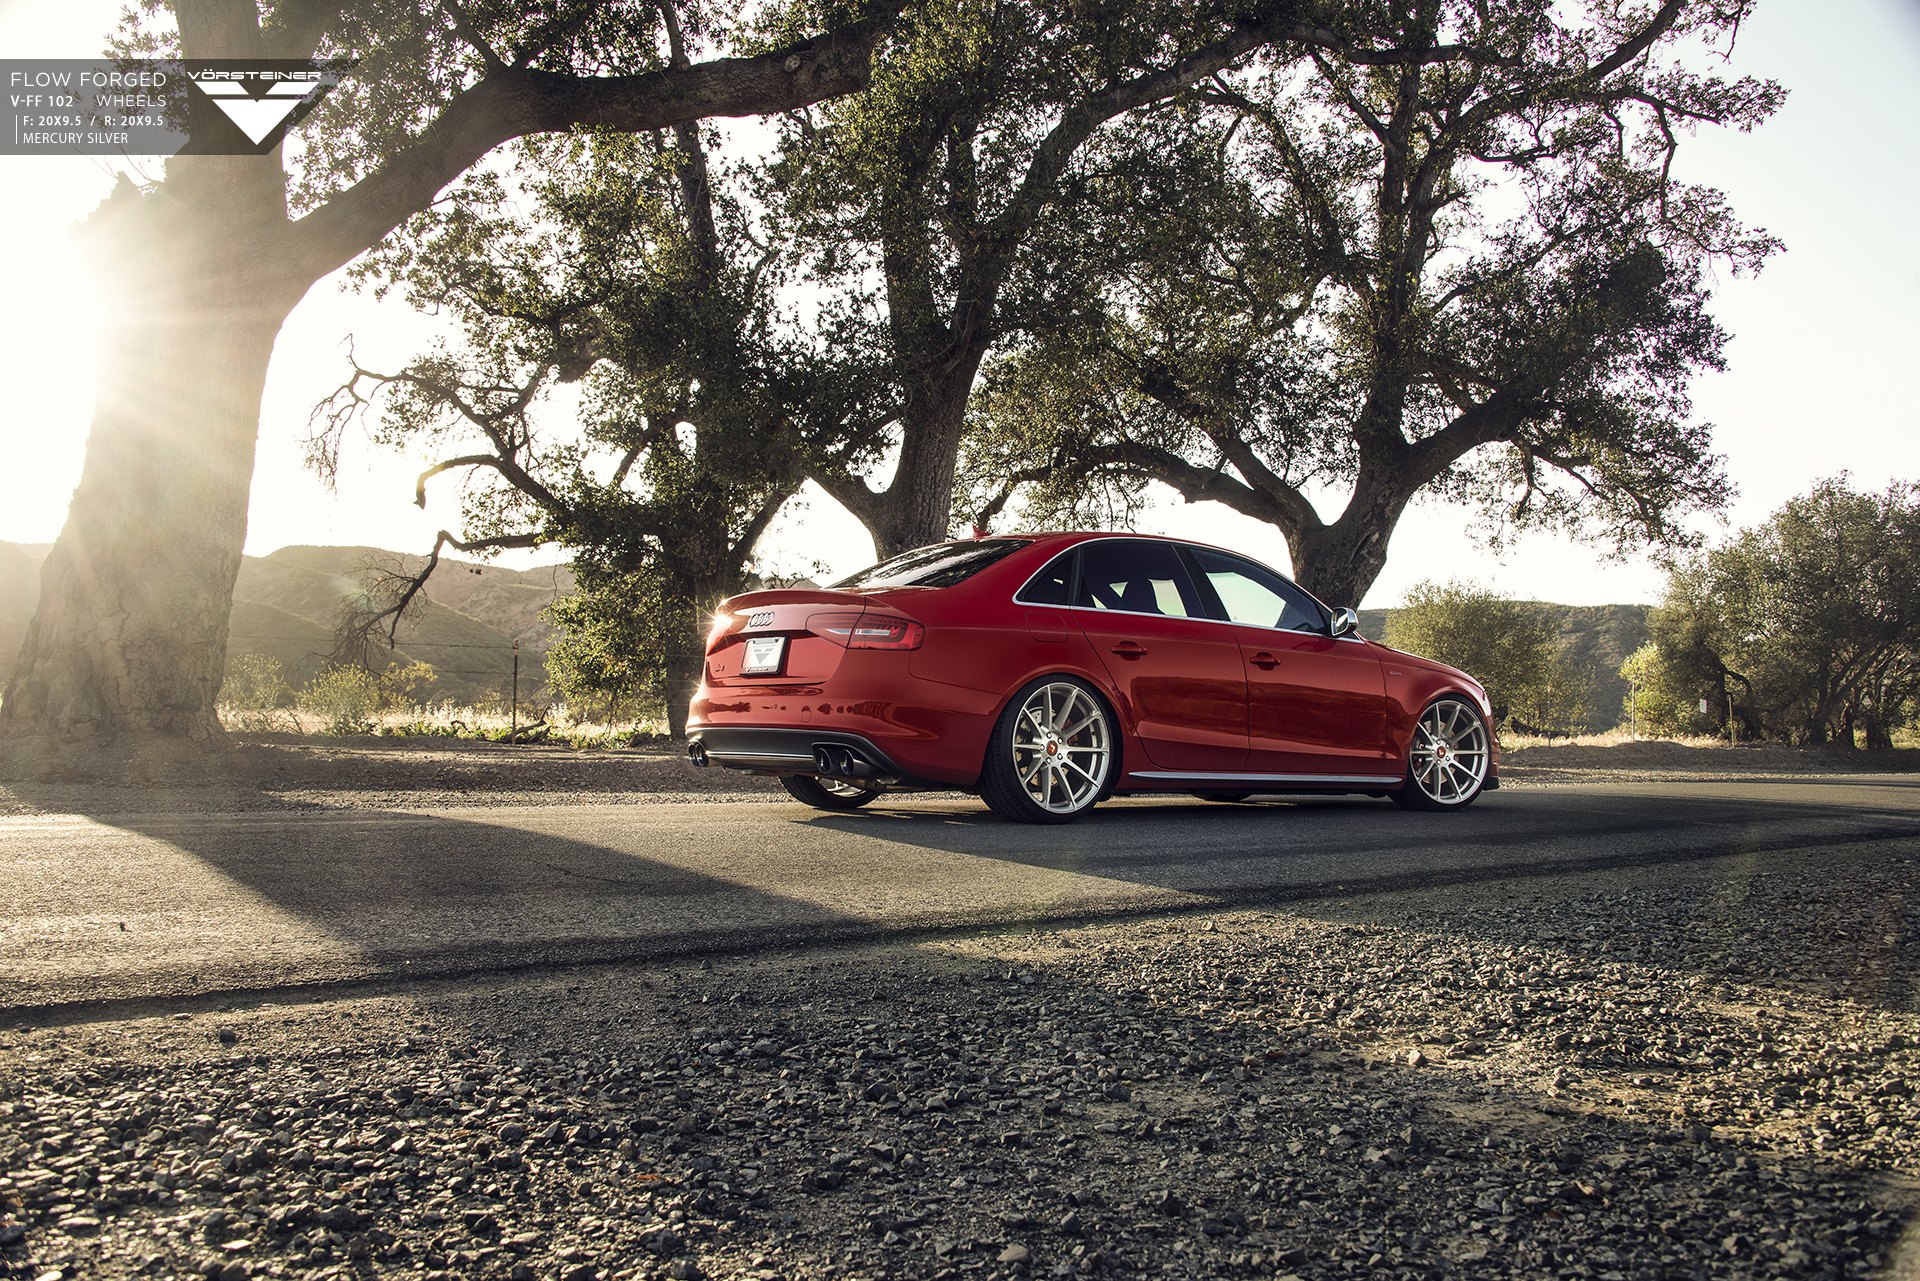 Red Audi S4 with Custom Side Skirts - Photo by Vorstiner